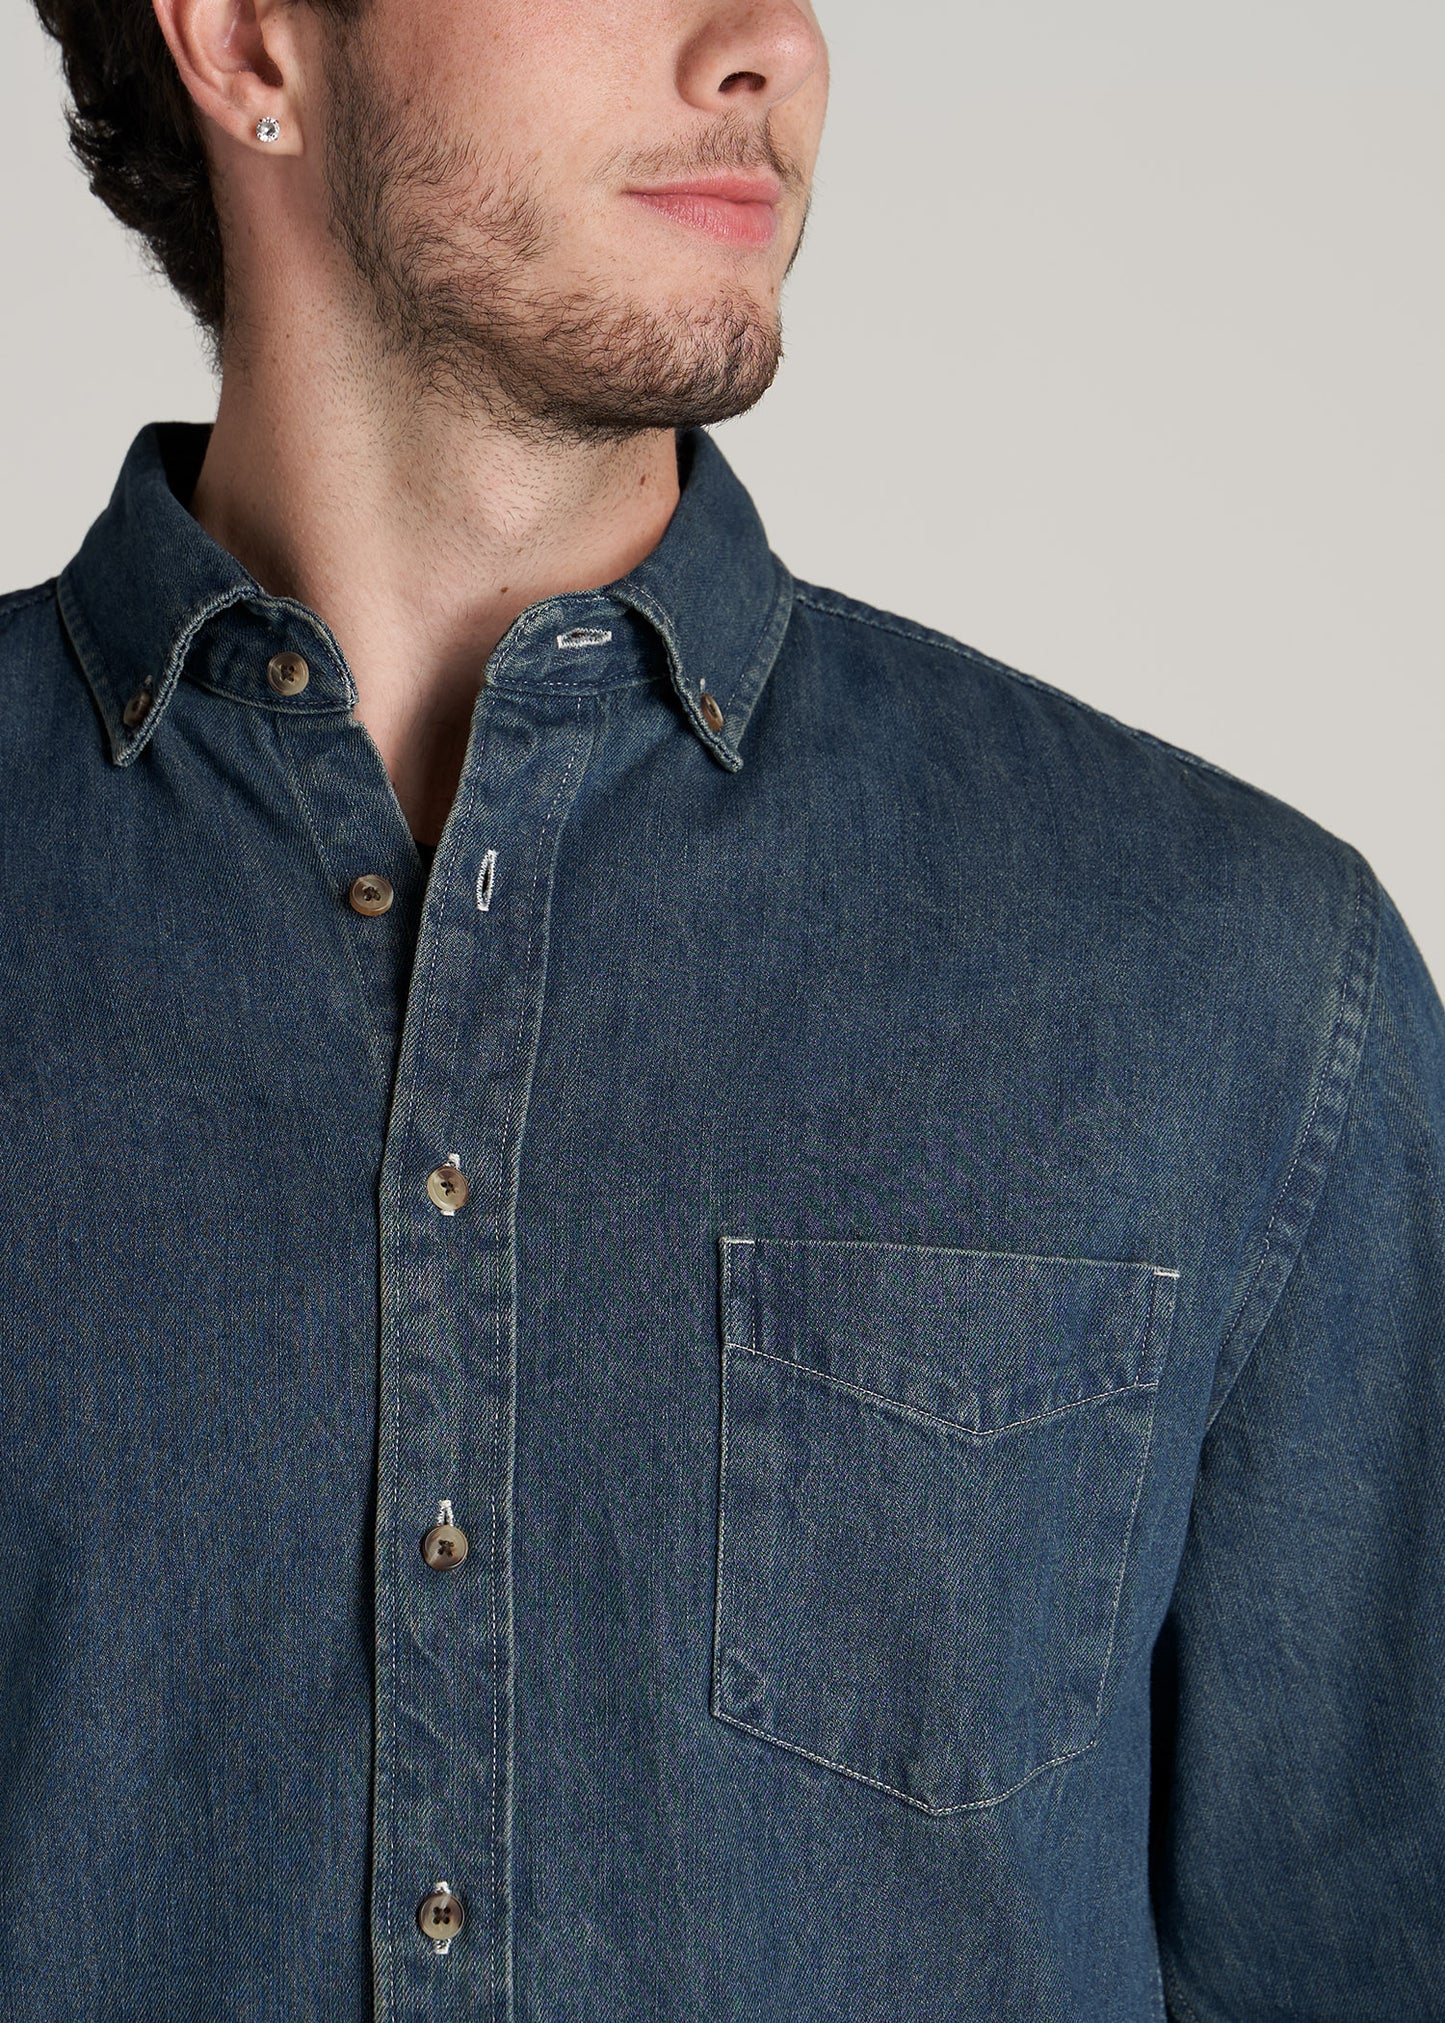 Ely Cattleman Denim Washed Snap Big and Tall Mens Classic Fit Long Sleeve  Button-Down Shirt, Color: Indigo - JCPenney